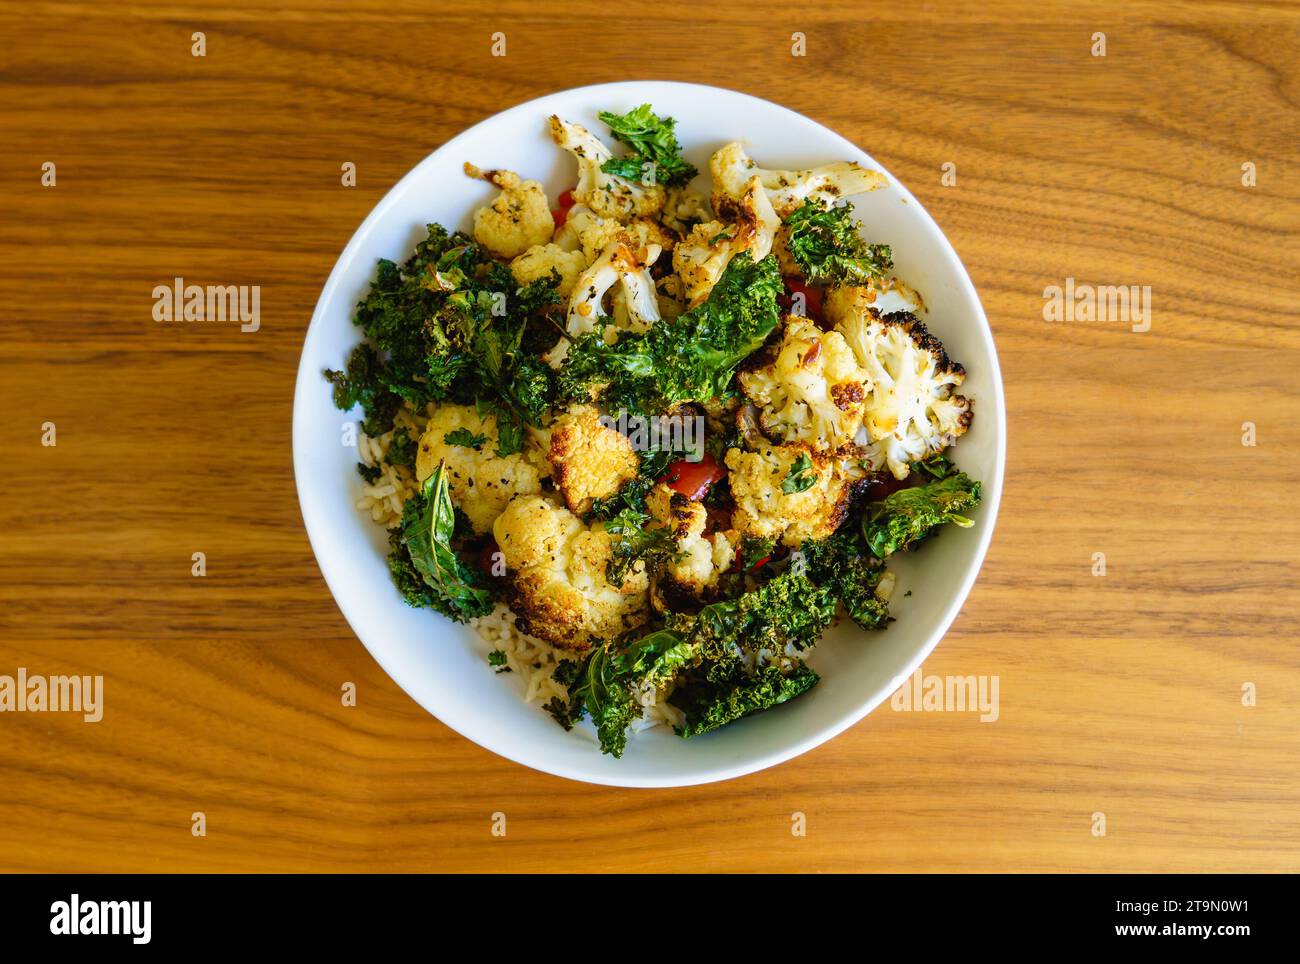 Vegetarian meal with oven-roasted cauliflower, kale, and red bell peppers over brown rice in a white bowl on a wooden table. Stock Photo